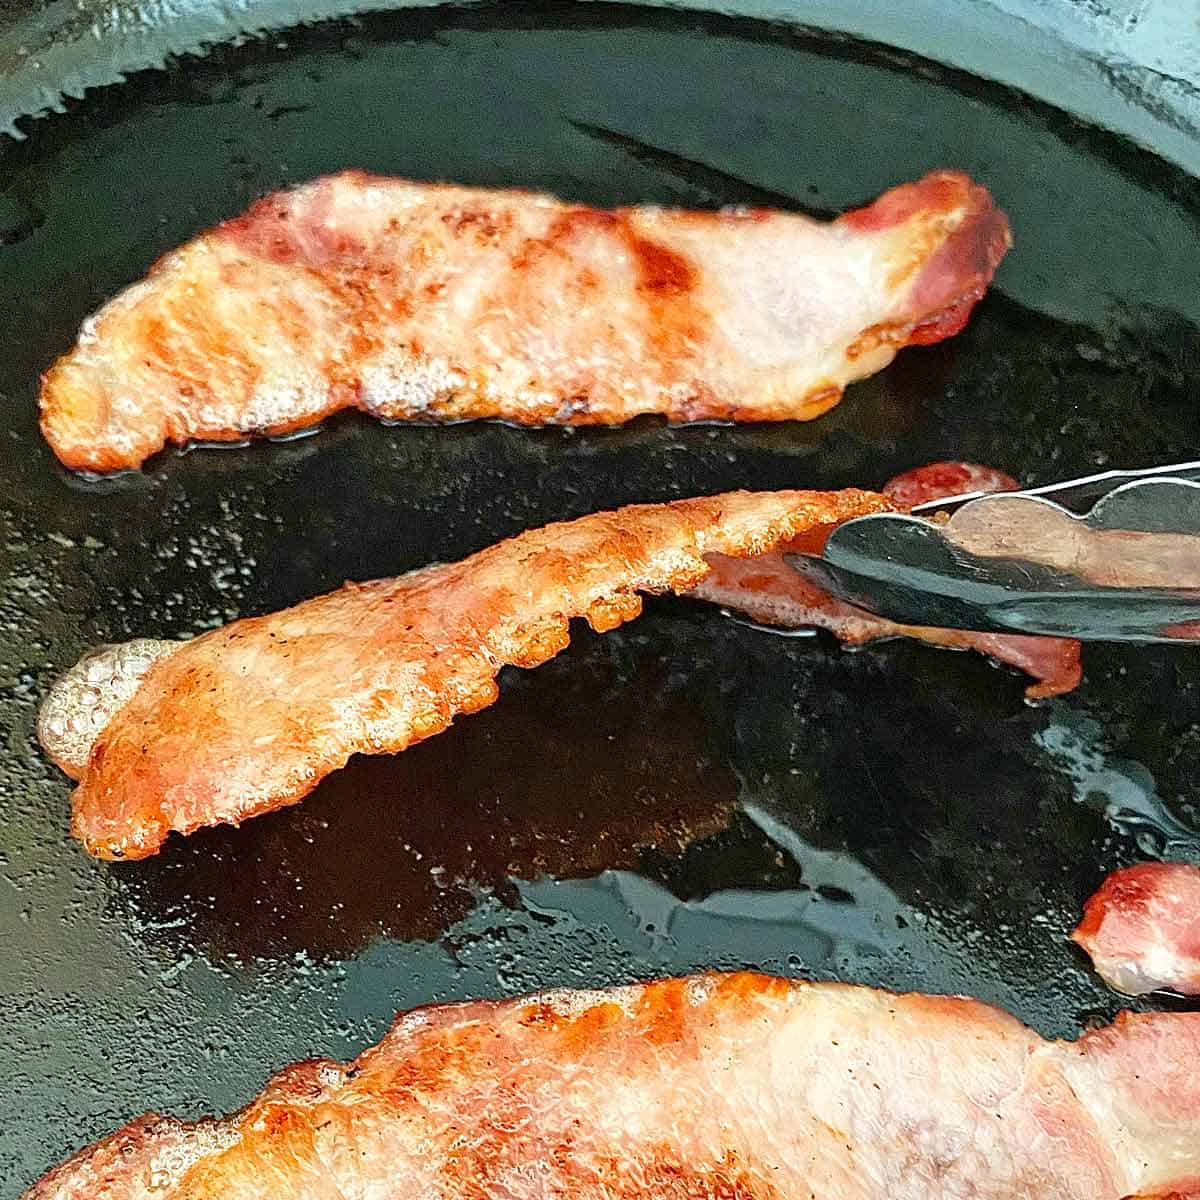 3 strips of back bacon in a skillet that have been notched on the edge to prevent curling.